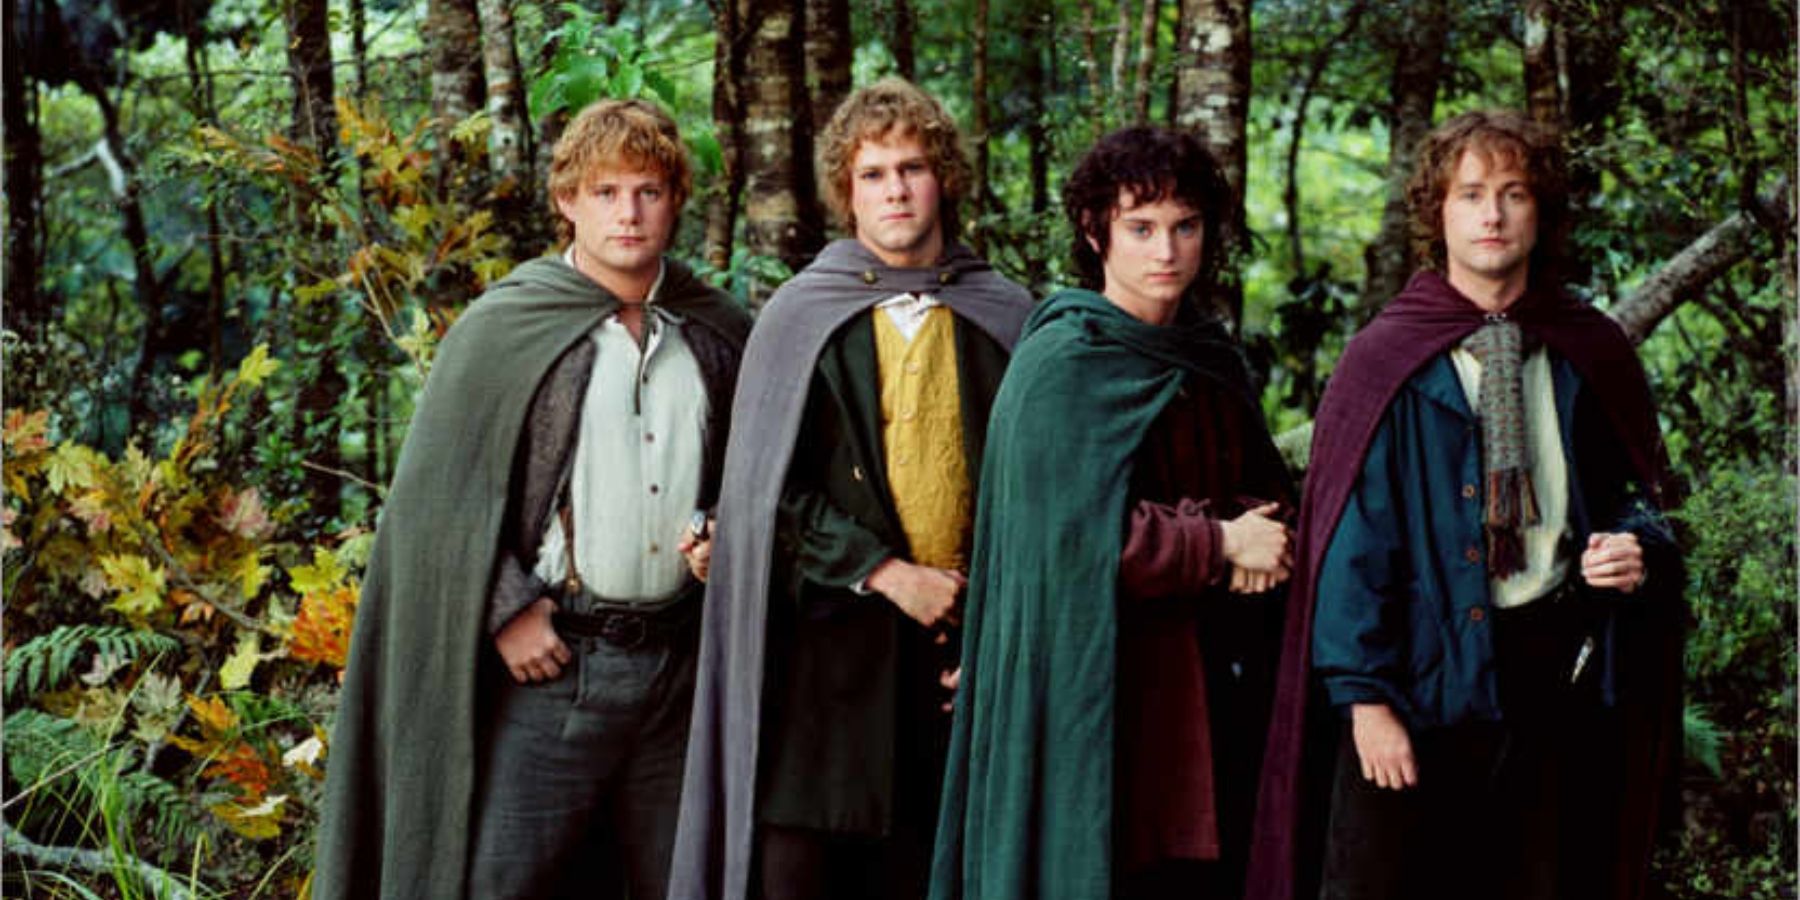 What You Need To Know About The Lord Of The Rings Spinoff